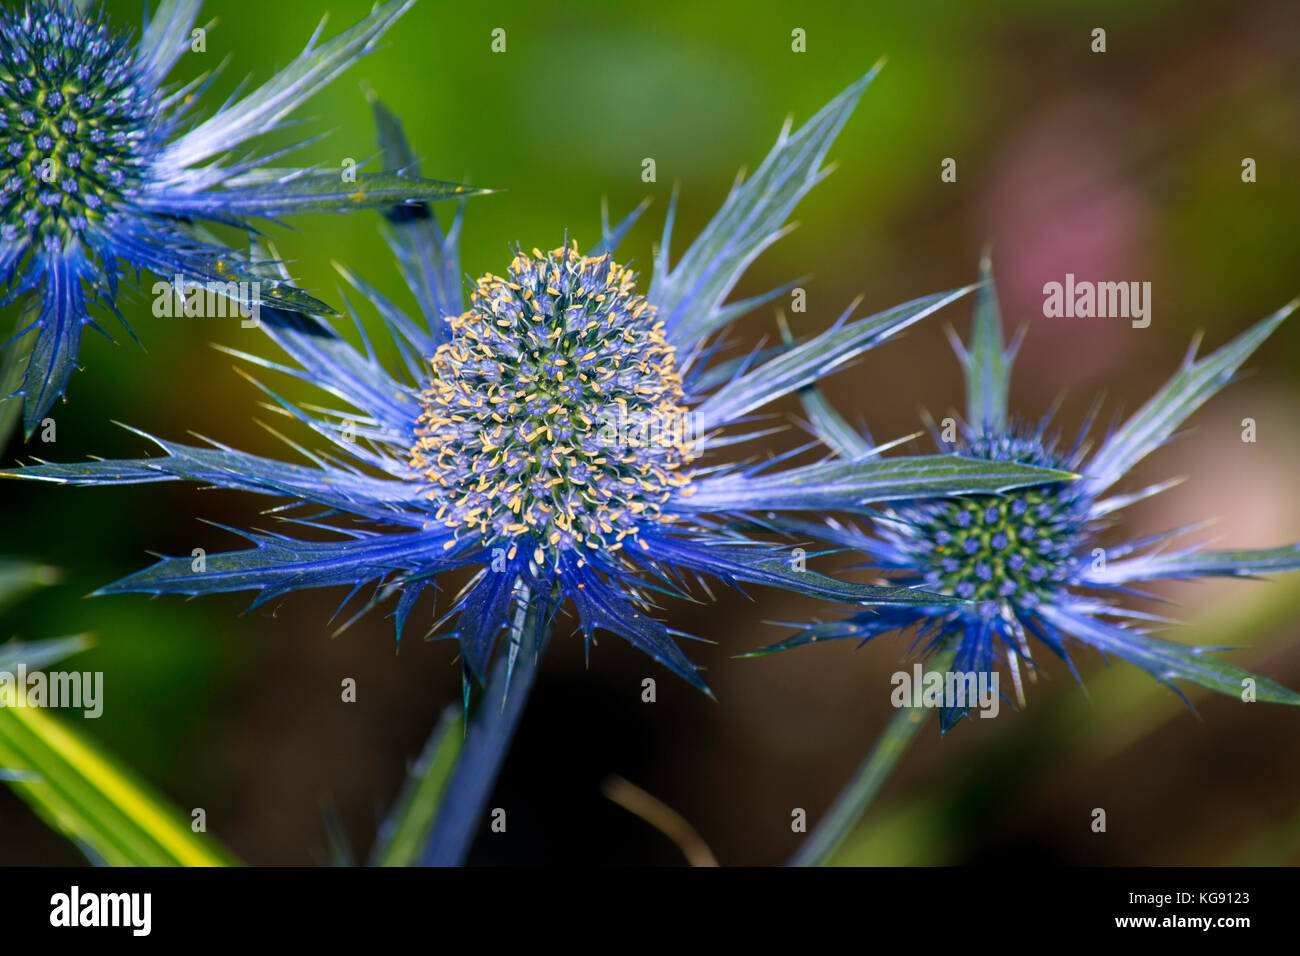 Sea Holly, also known as Eryngium, has blue leaves or bracts, seen in garden in Seward Park, Seattle Stock Photo